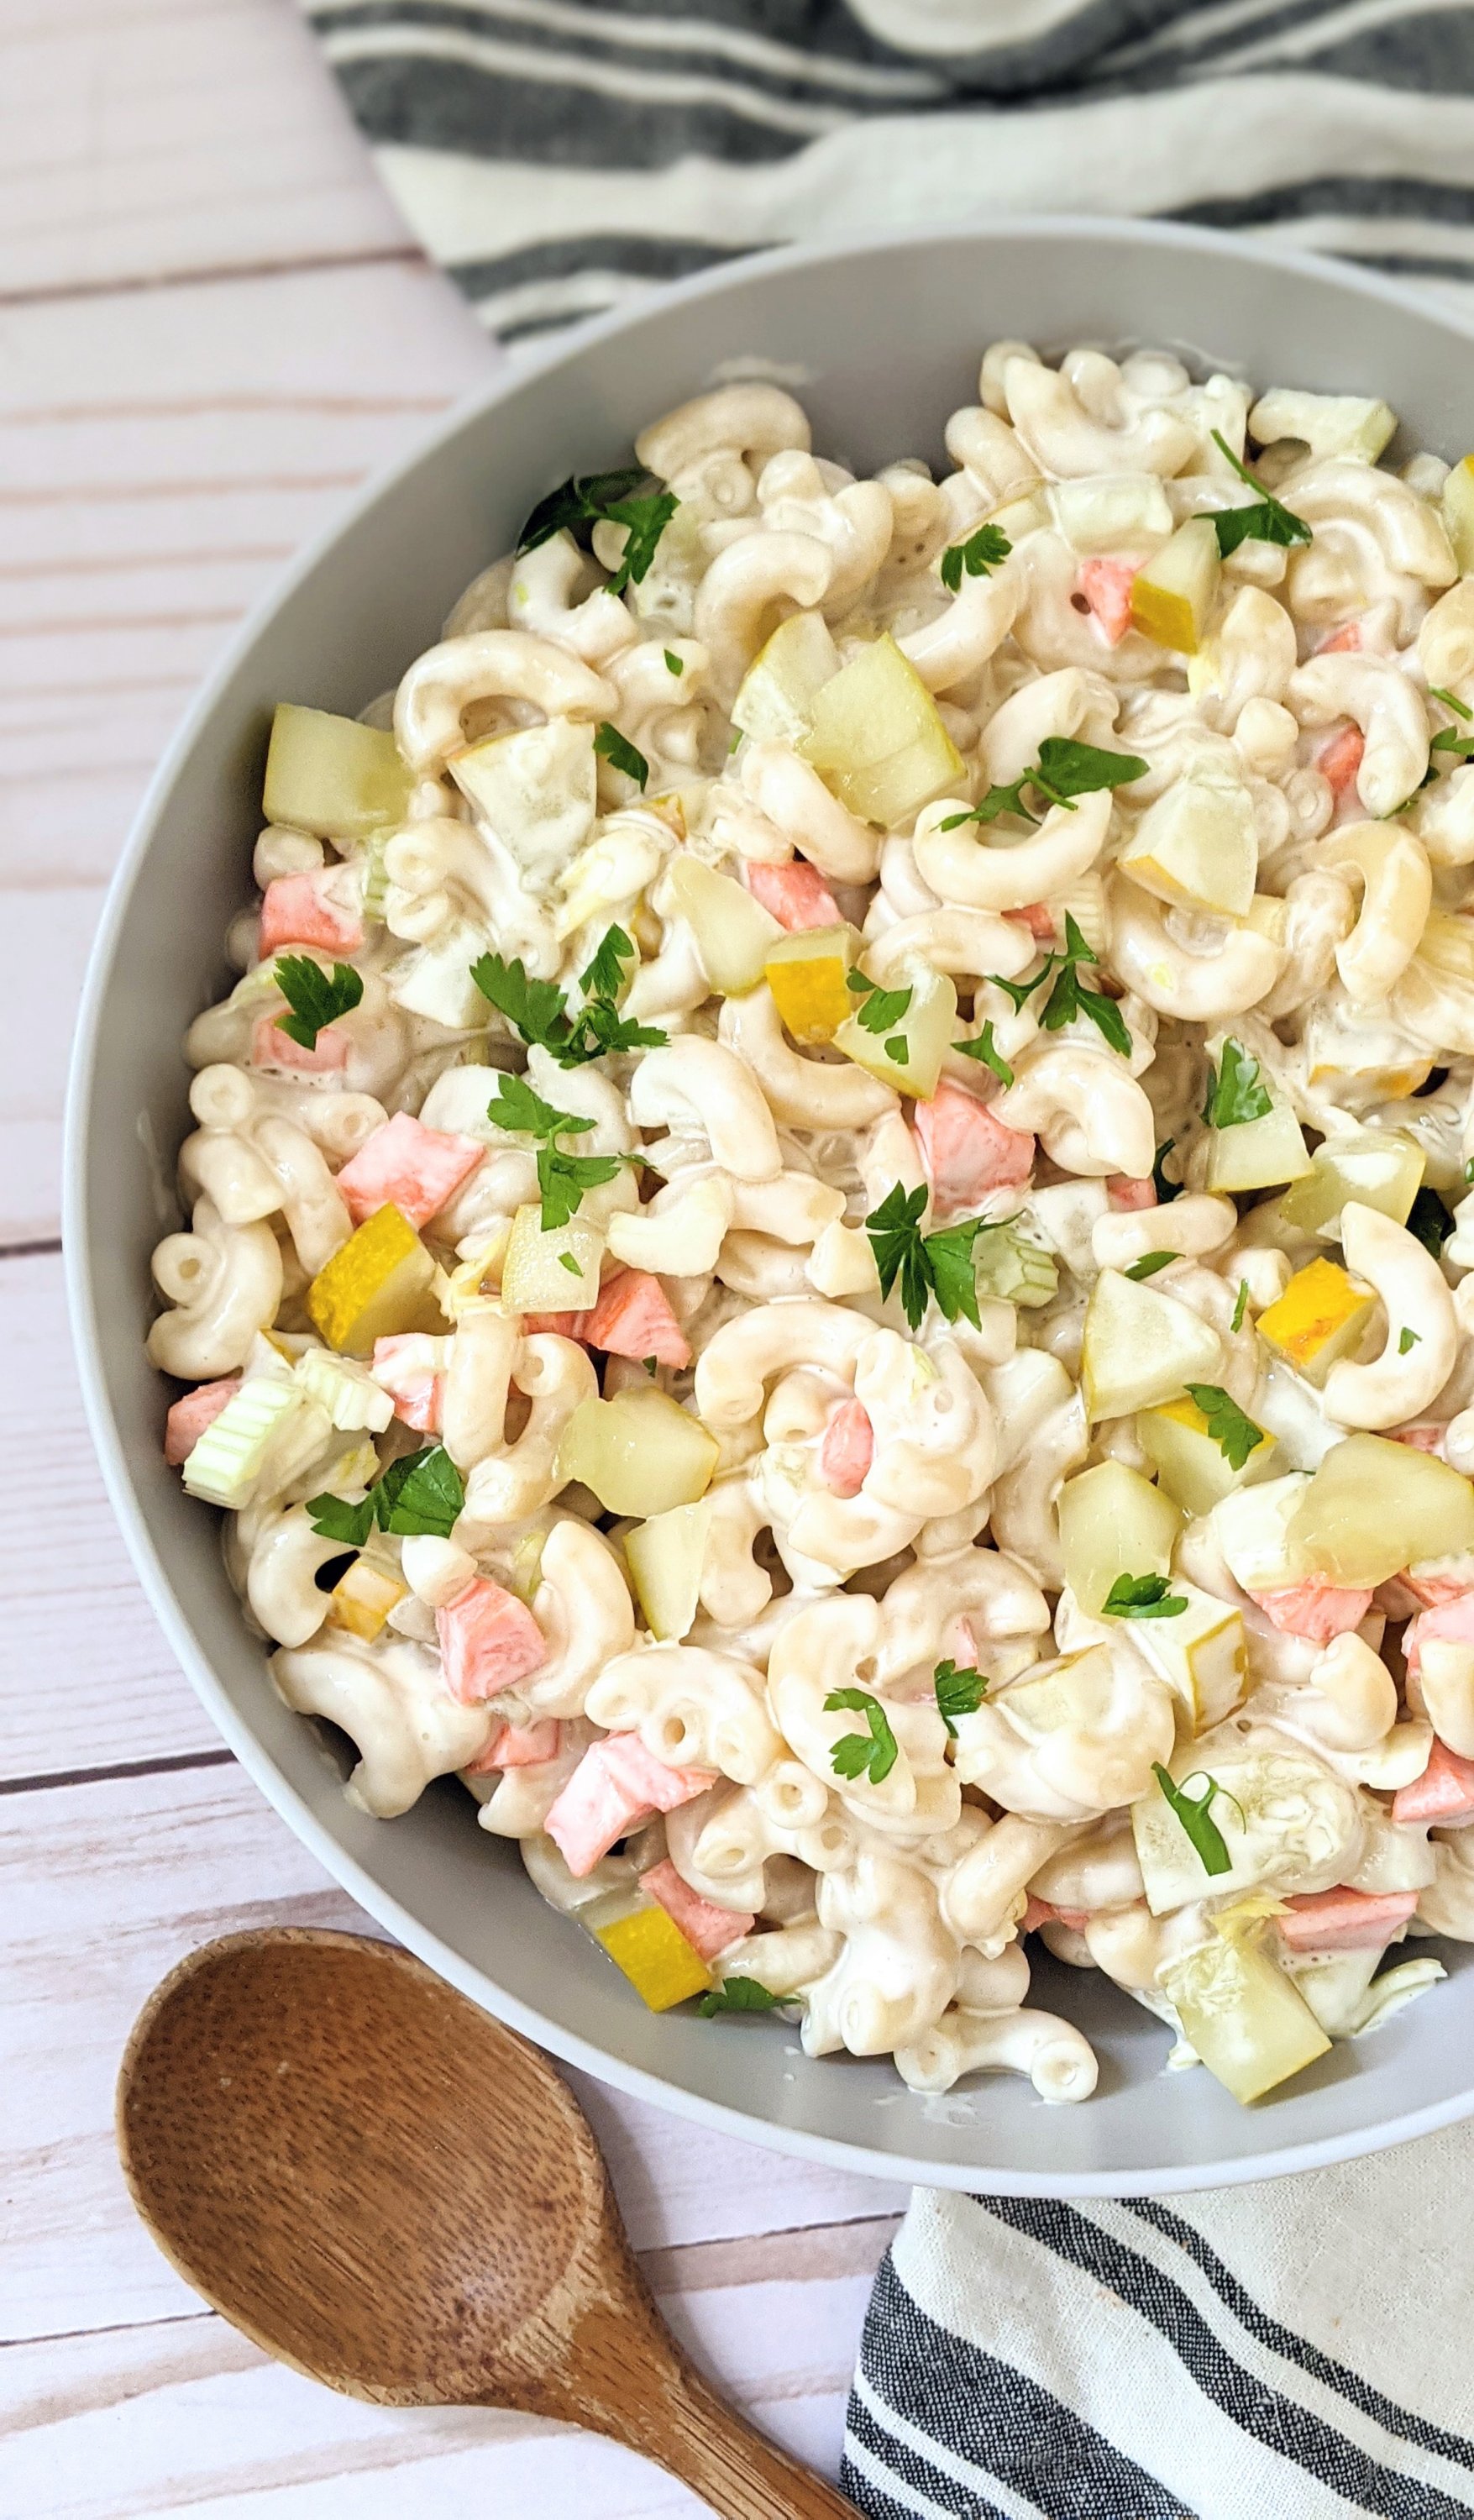 gluten free dill pickle macaroni salad recipe with pickles no gluten pasta vegan dairy free macaroni pickle salad summer pickle recipes for cookout entertaining fresh or jarred pickle recipes